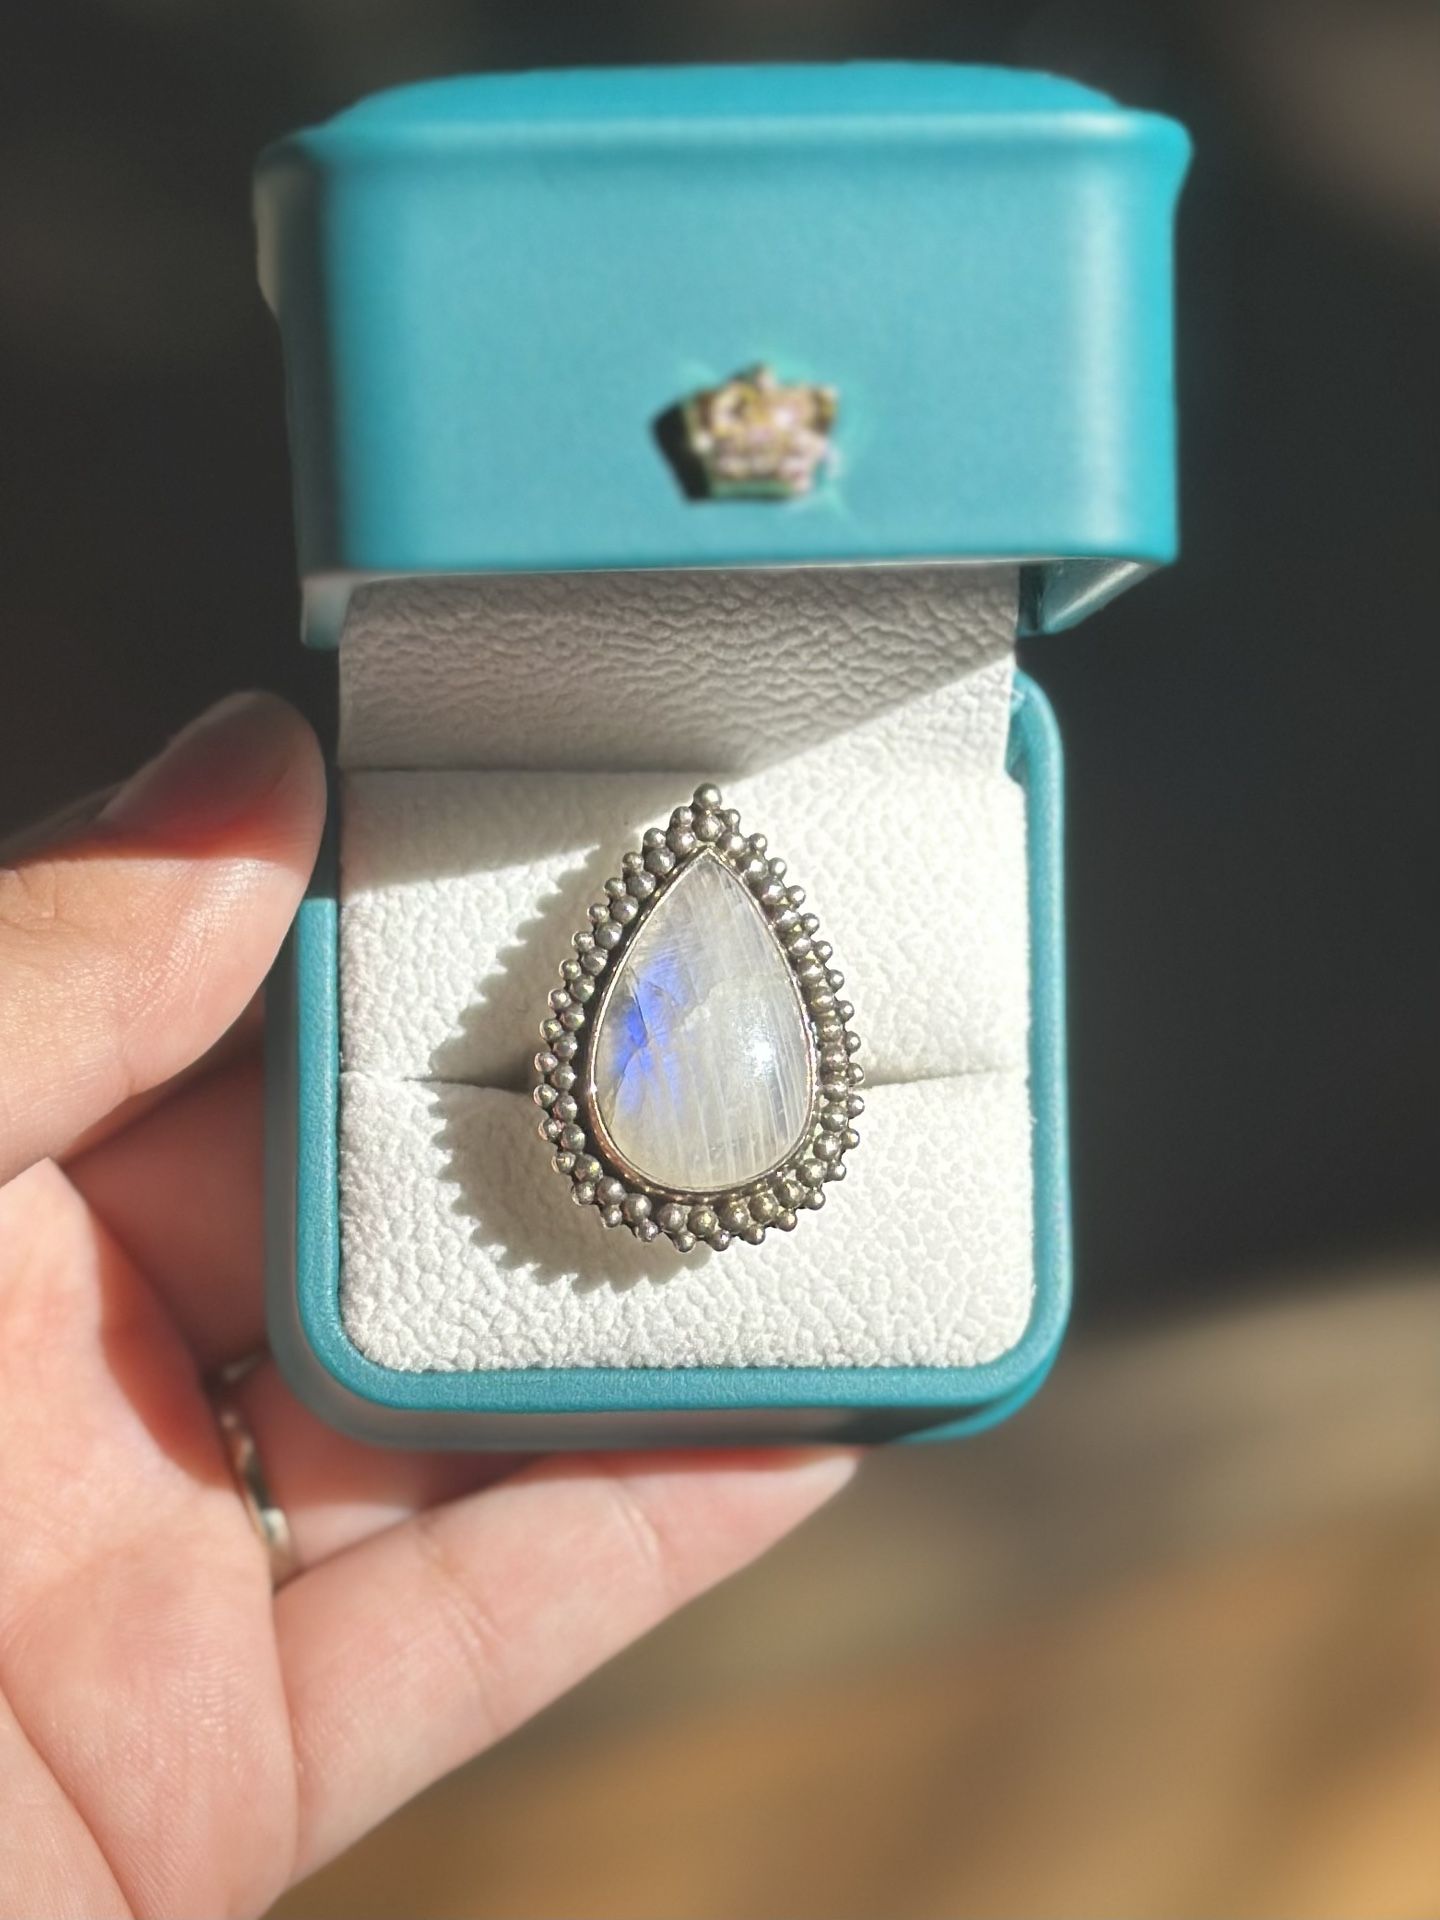 Genuine Moonstone on 925 sterling silver, size 8